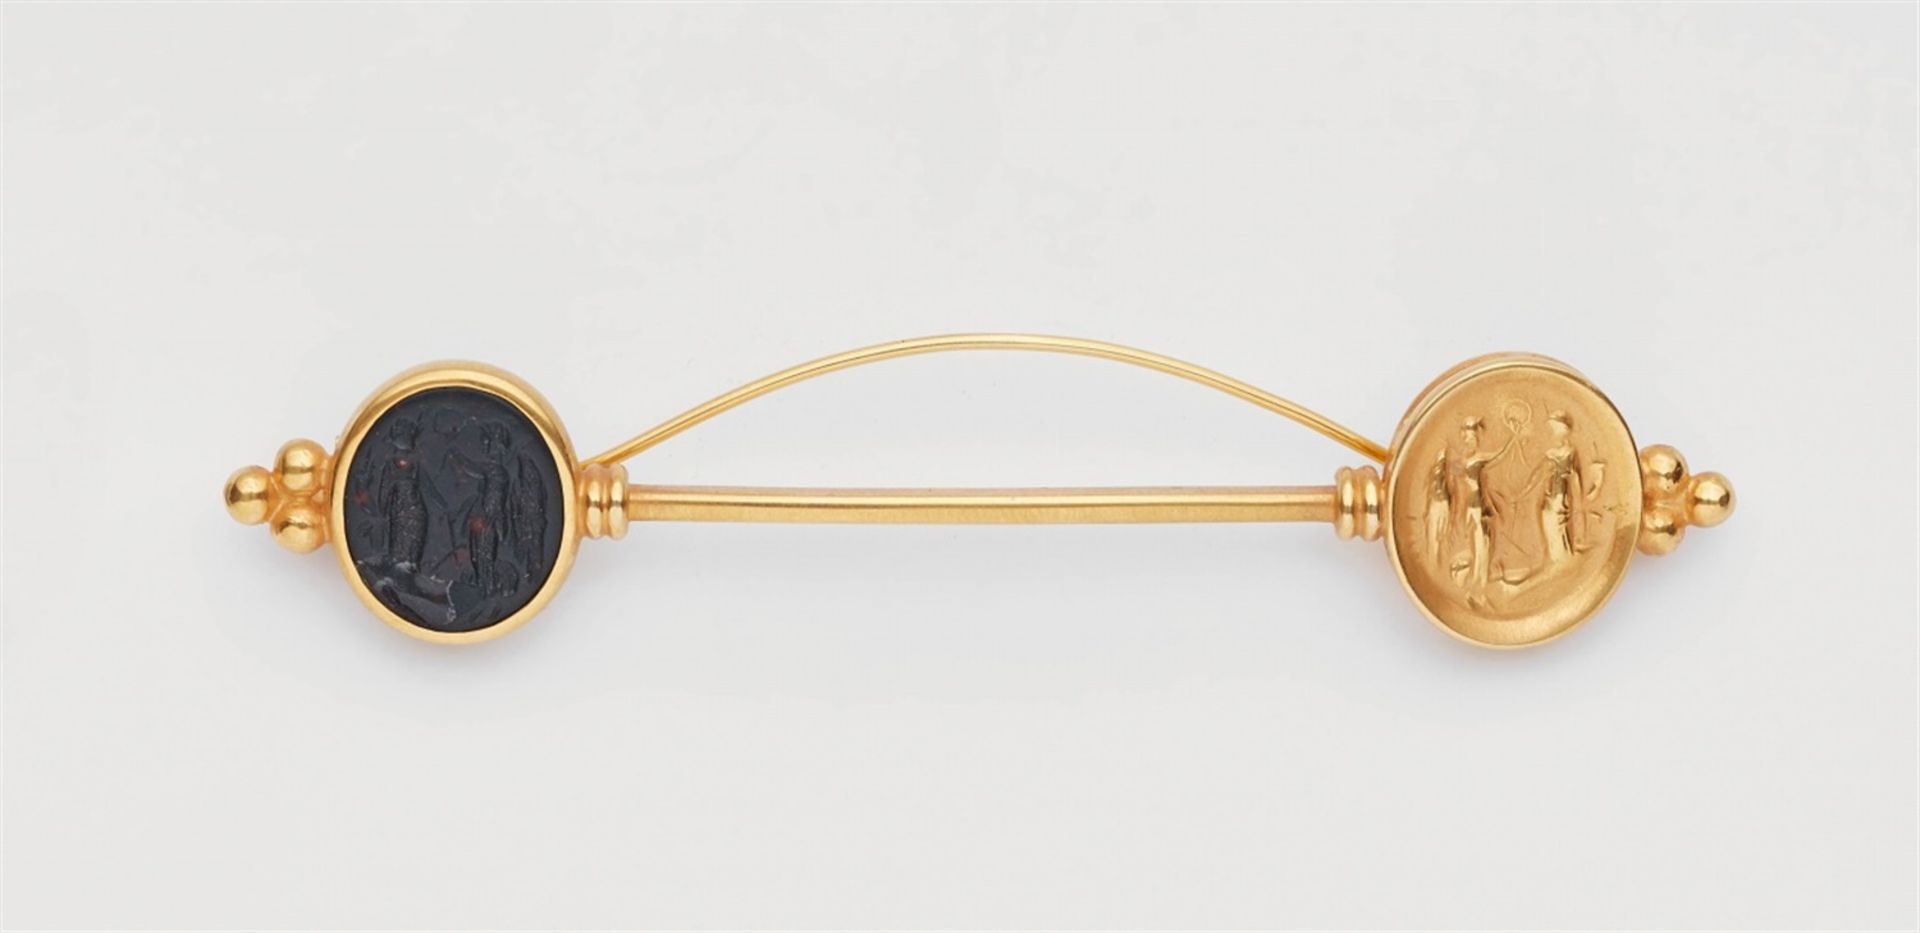 An 18k gold pin brooch with a Roman heliotrope intaglio and its impressionA forged 18k gold pin